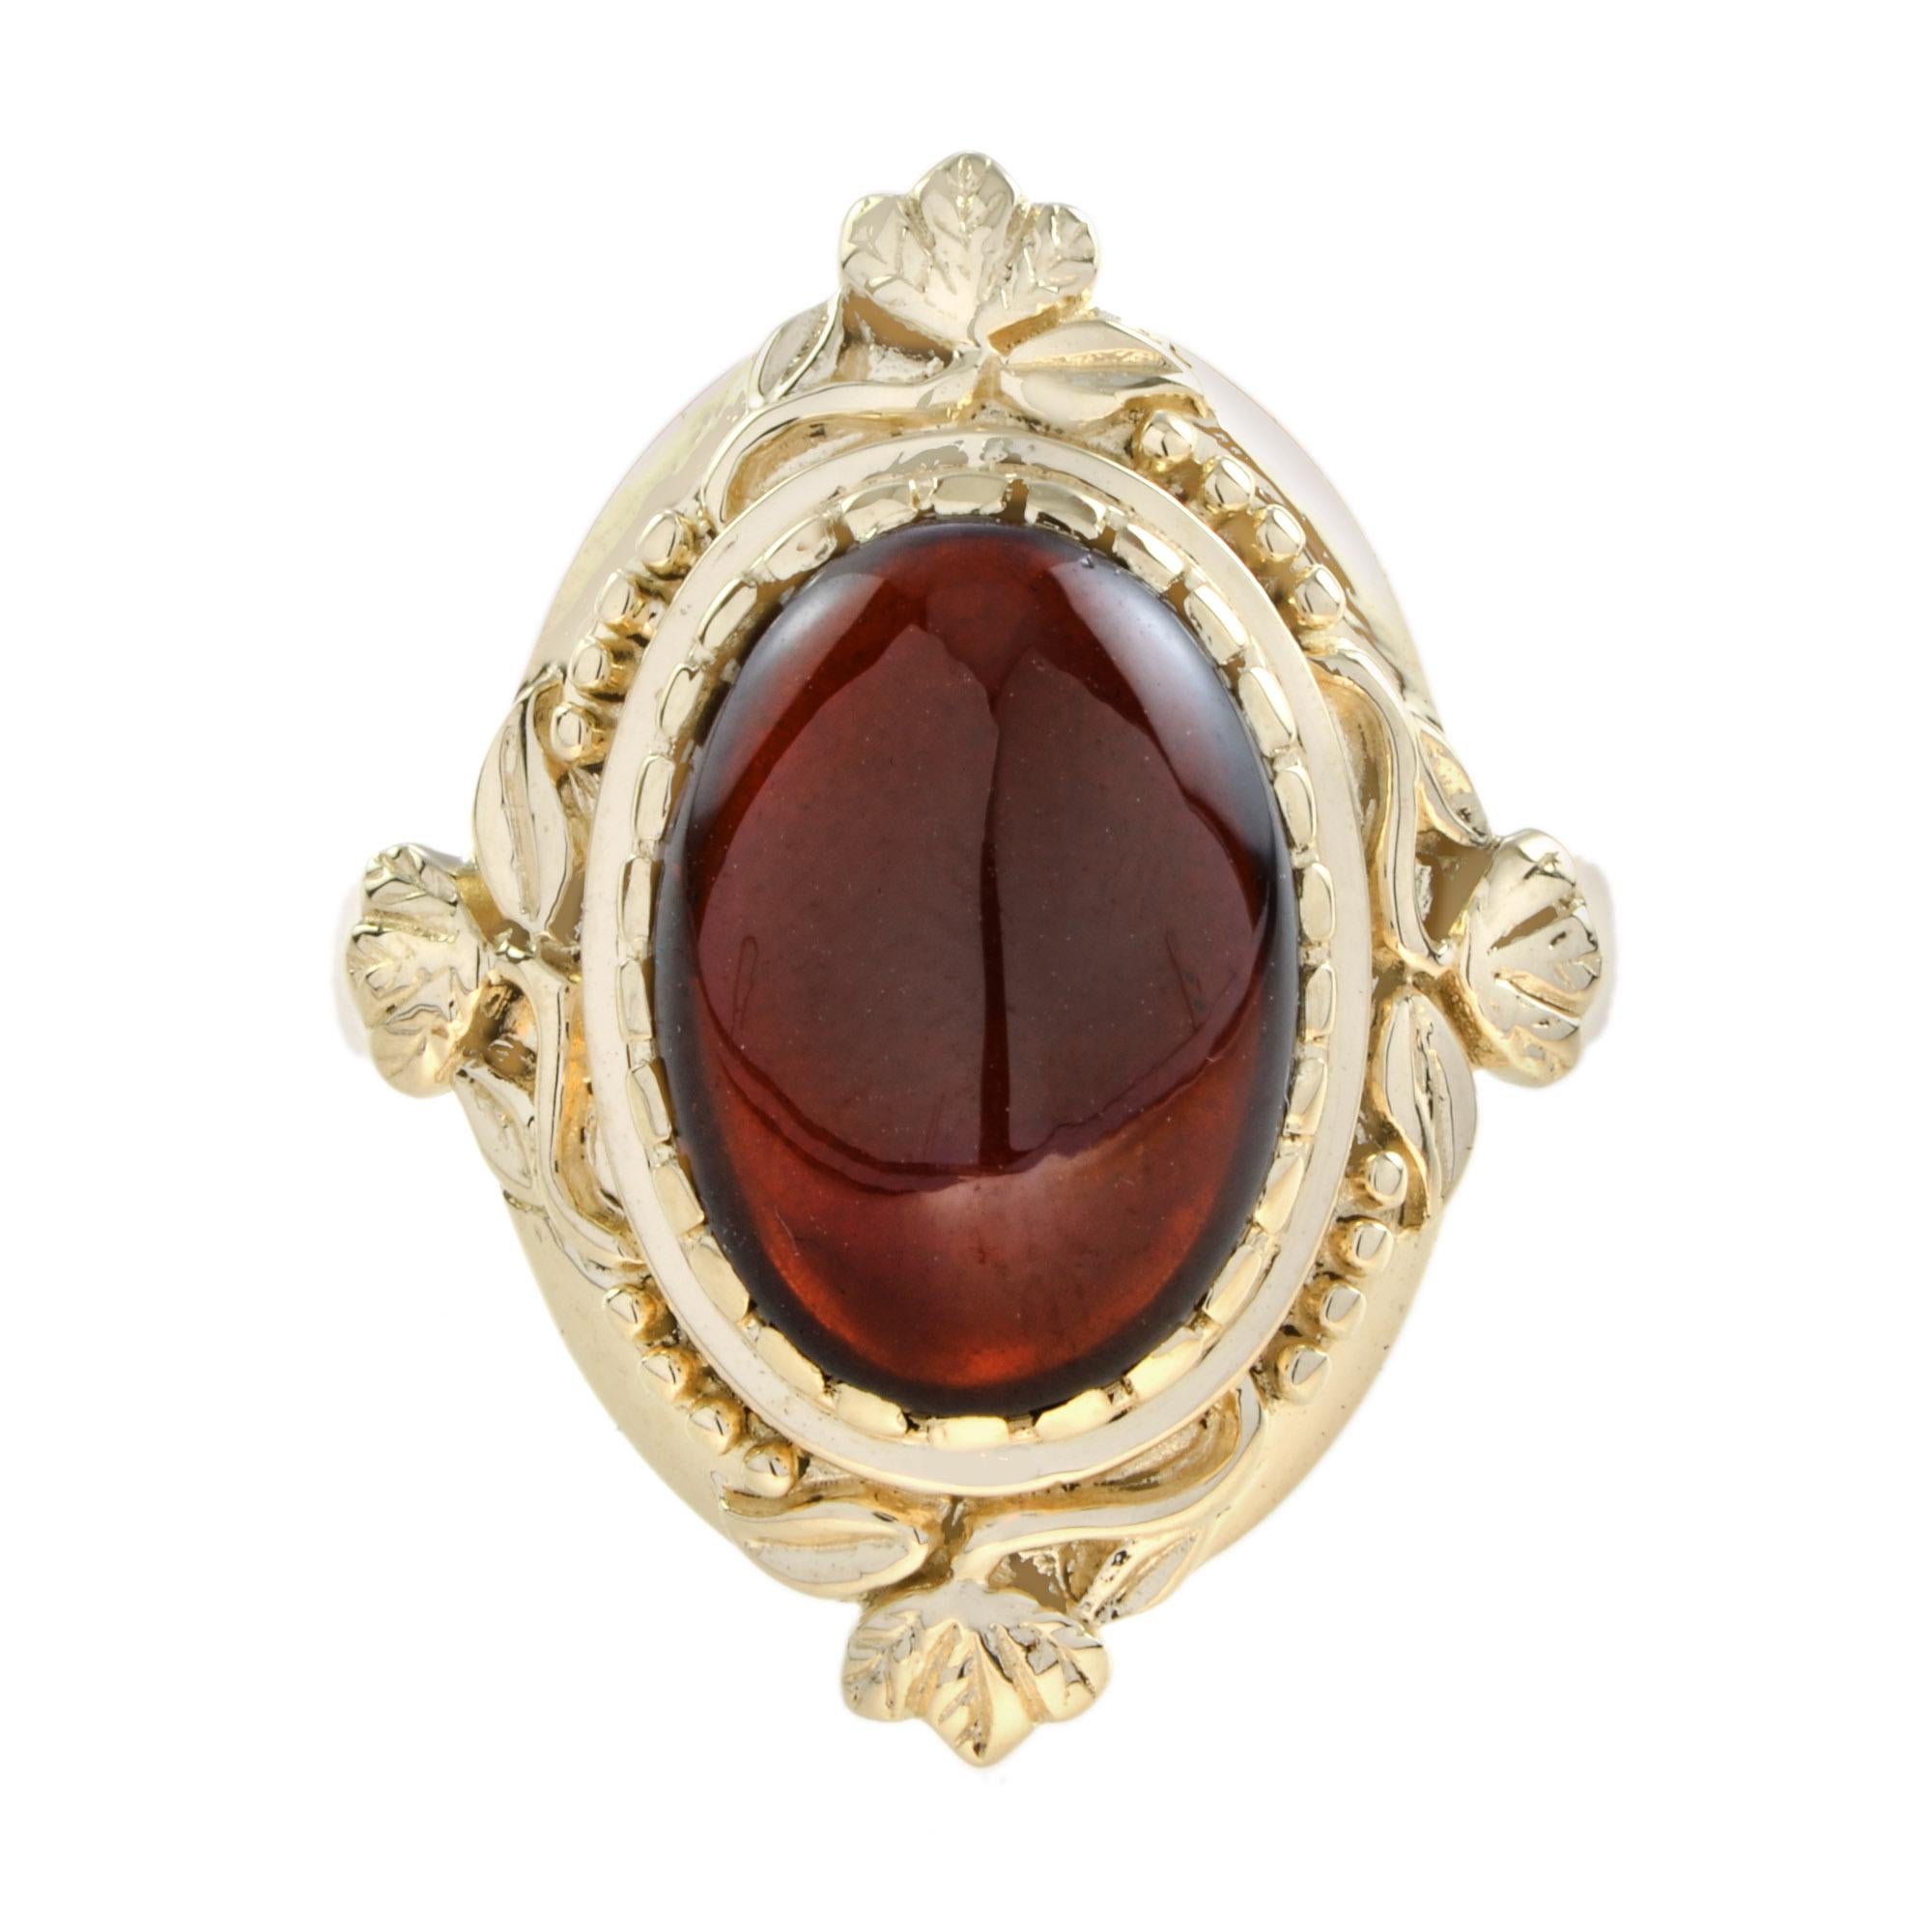 Vintage styling in a yellow gold ring, with very fine twist-wire work and leaf motifs, bezel set with a beautiful wine-red cabochon cut garnet. 

Ring Information
Metal: 9K Yellow Gold
Total weight: 6.59 g. (approx. total weight)
Size: US